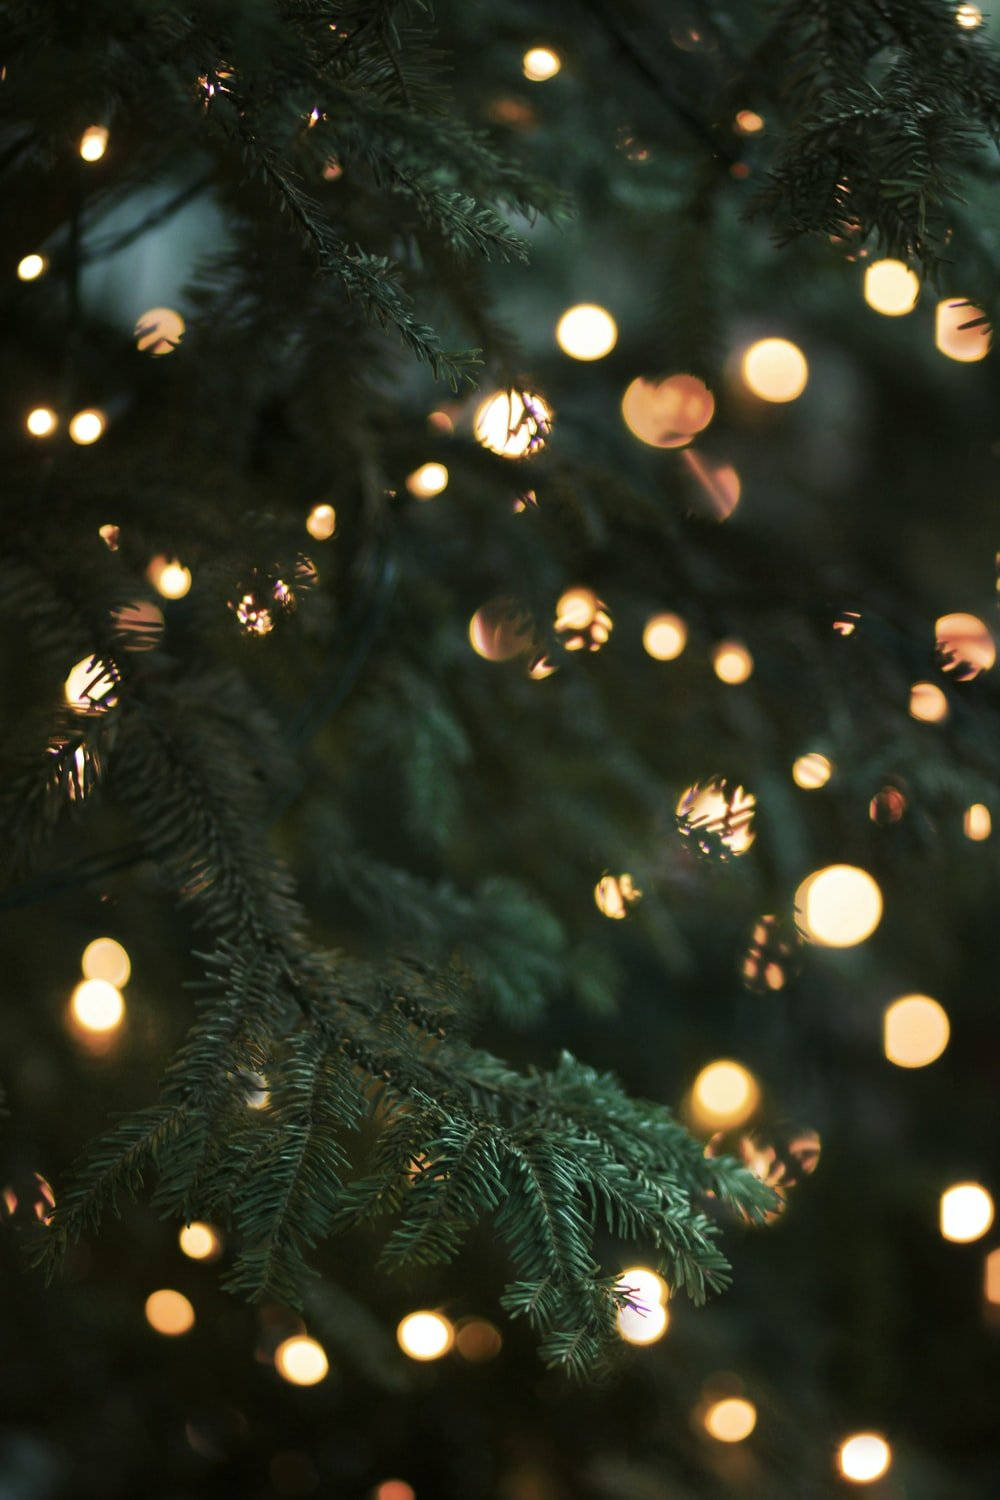 Get into the Christmas spirit with a mesmerizing display of twinkling lights! Wallpaper